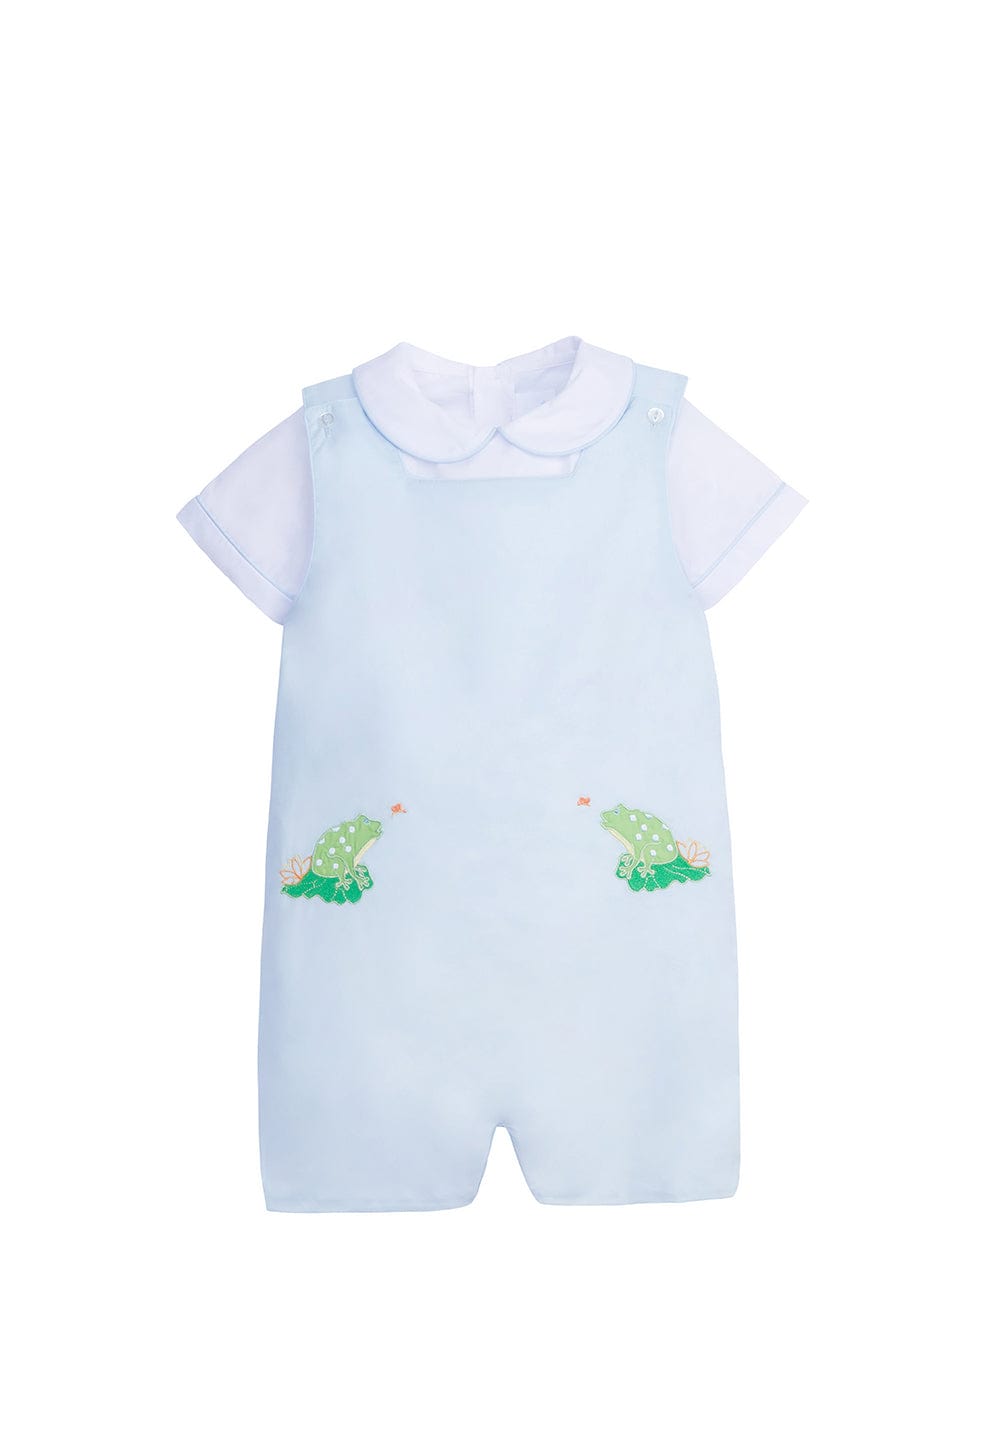 classic childrens clothing boys light blue john john set with embroidered frog detail